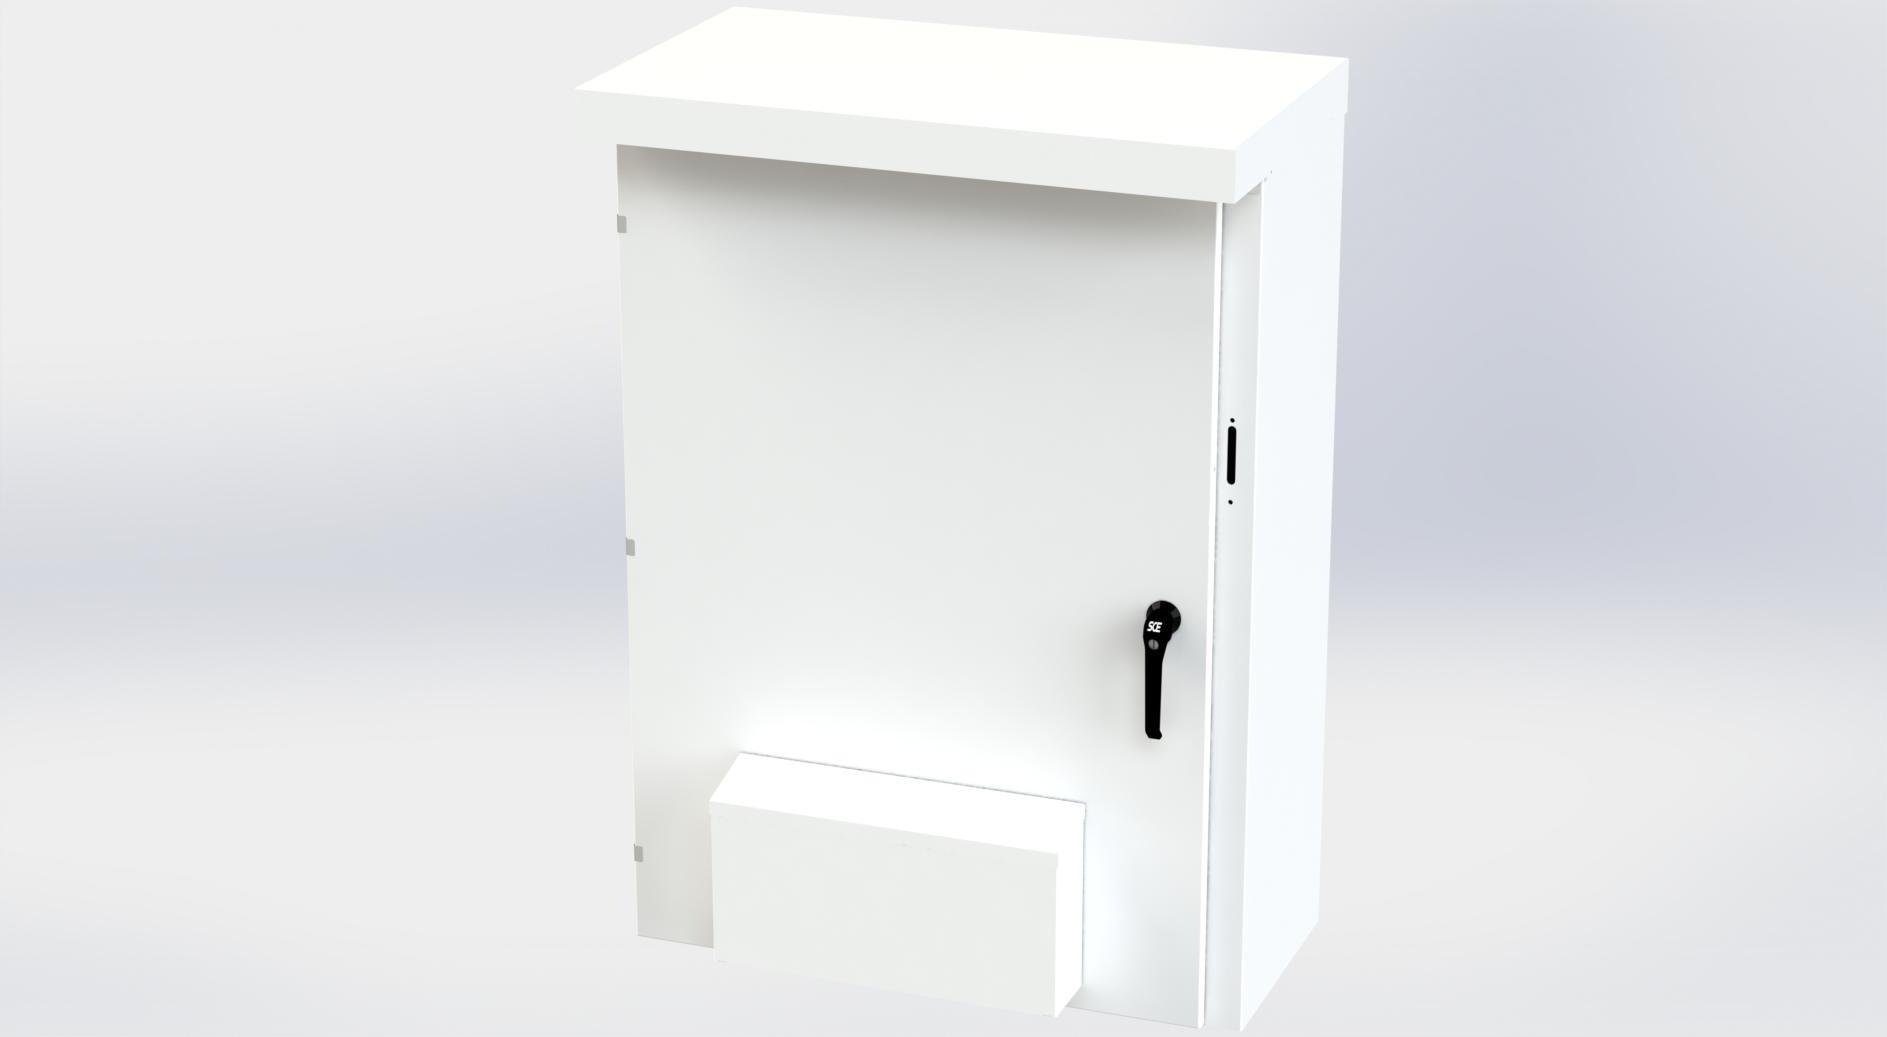 Saginaw Control SCE-53XVR3716 Enclosure, Vented Type 3R Disconnect, Height:53.00", Width:37.38", Depth:16.00", White powder coating inside and out. Optional sub-panels are powder coated white.